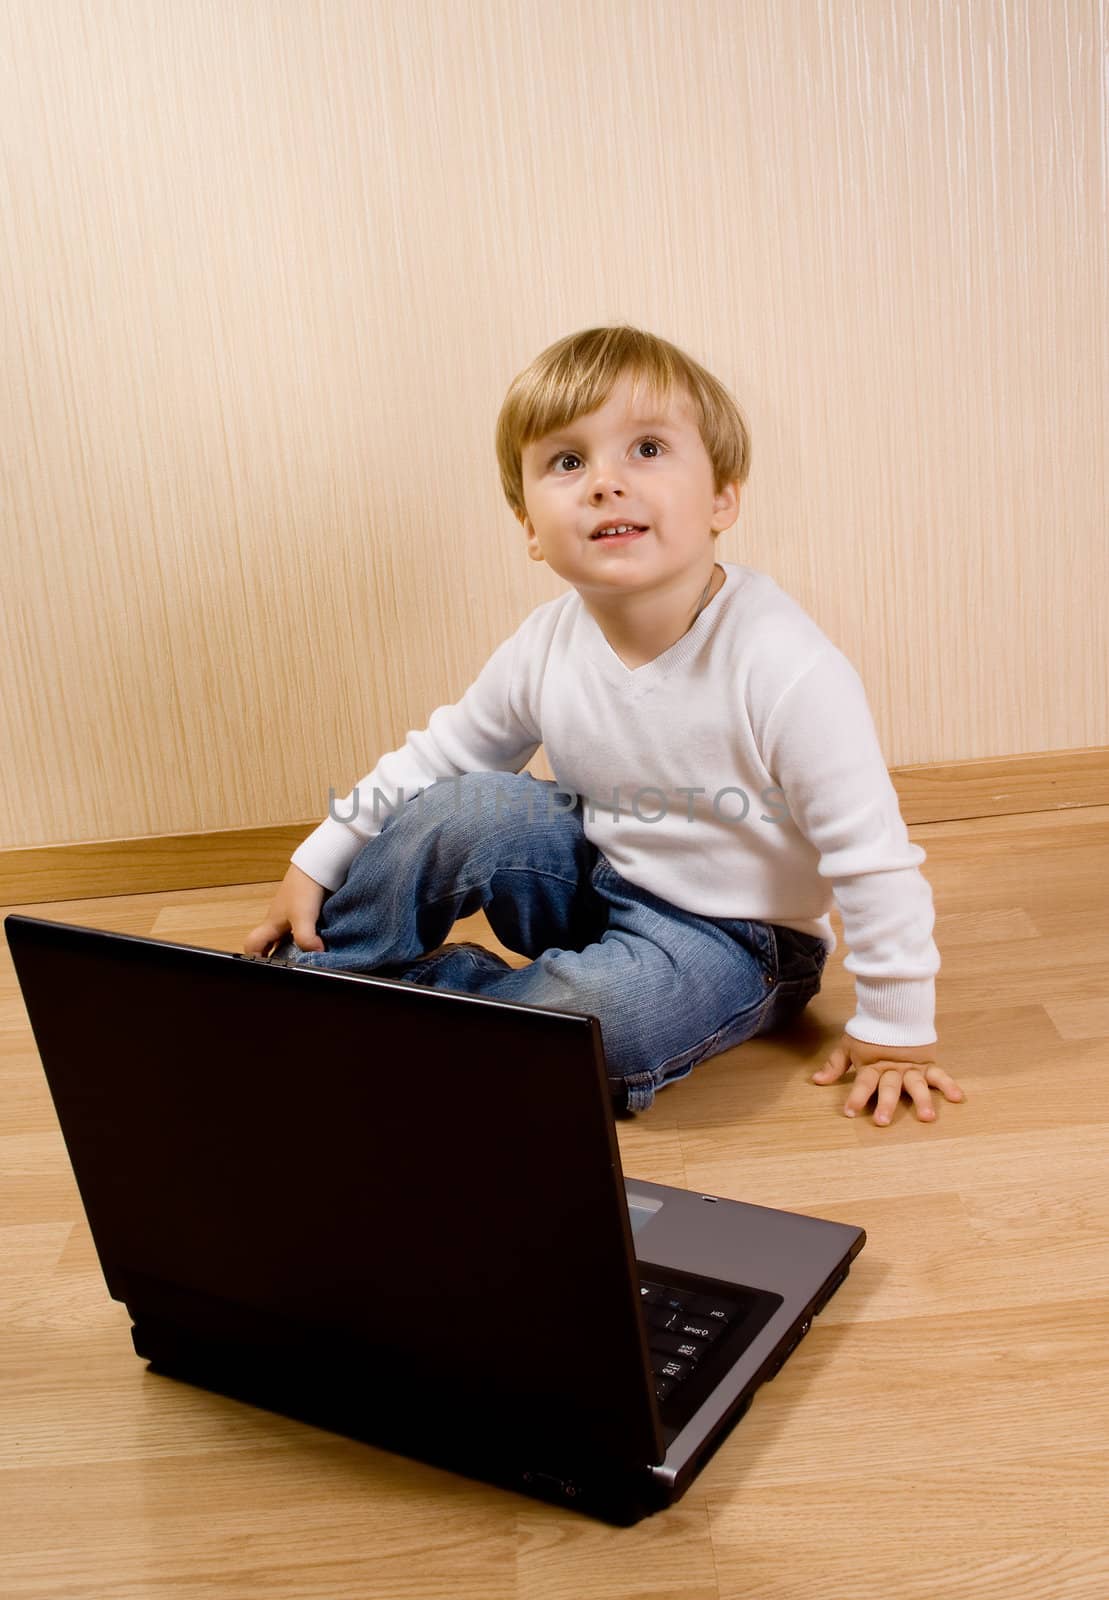 The child on the wood floor with laptop by BIG_TAU